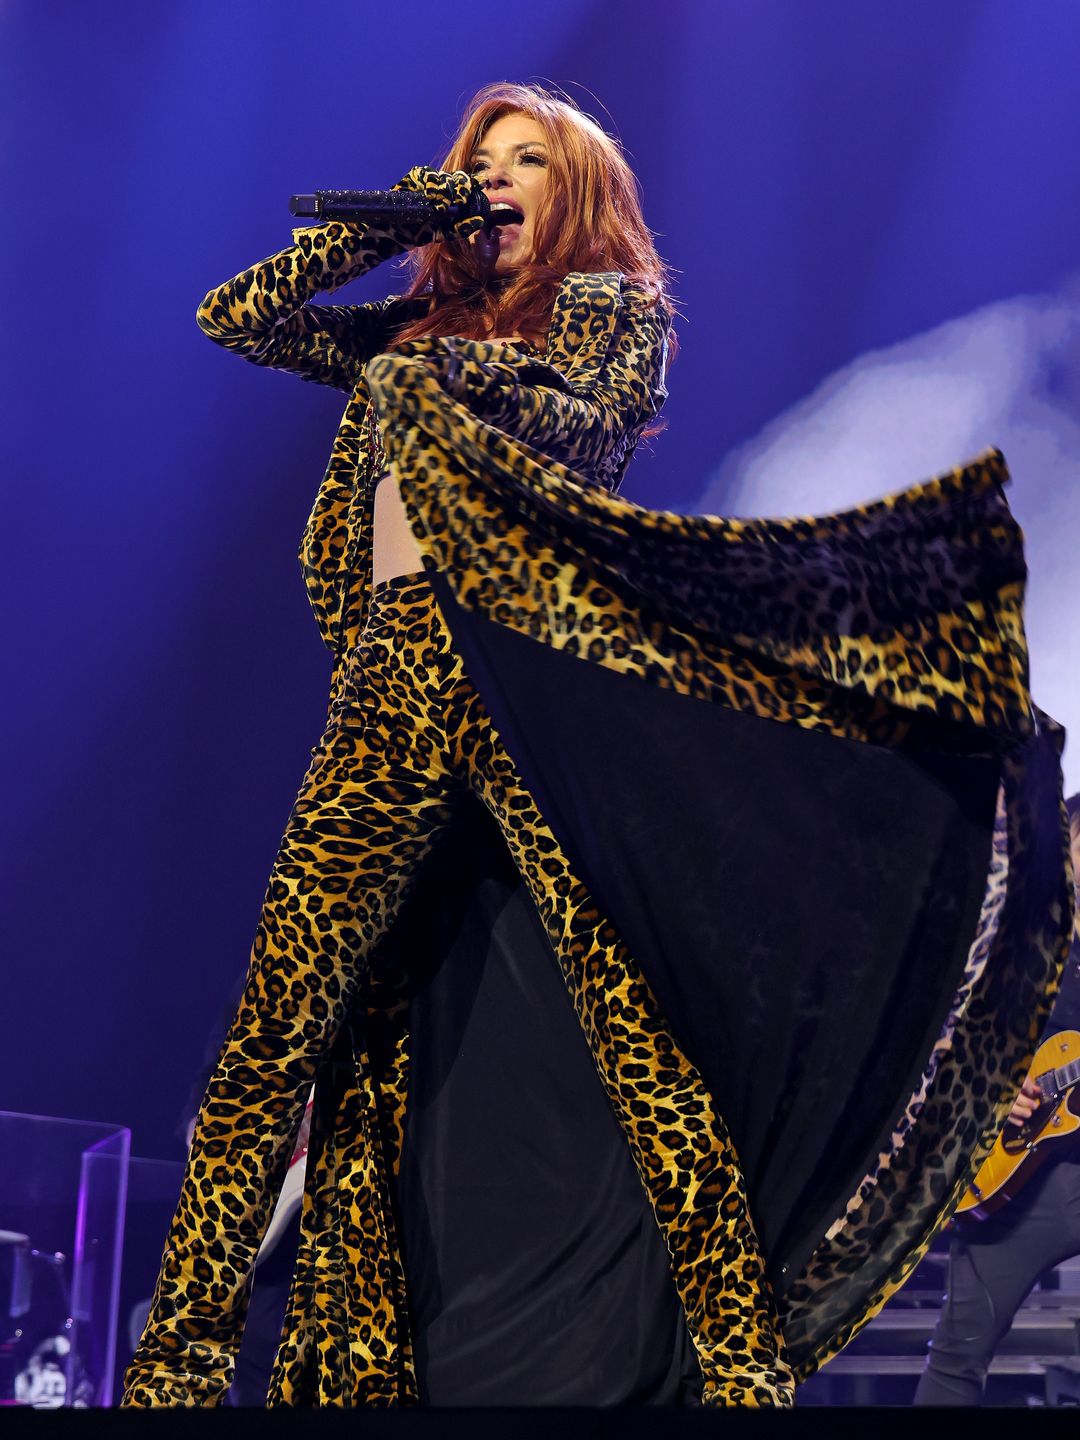 Shania Twain performs onstage during the Shania Twain 'Queen of Me' Global Tour Opener at Spokane Arena on April 28, 2023 in Spokane, Washington